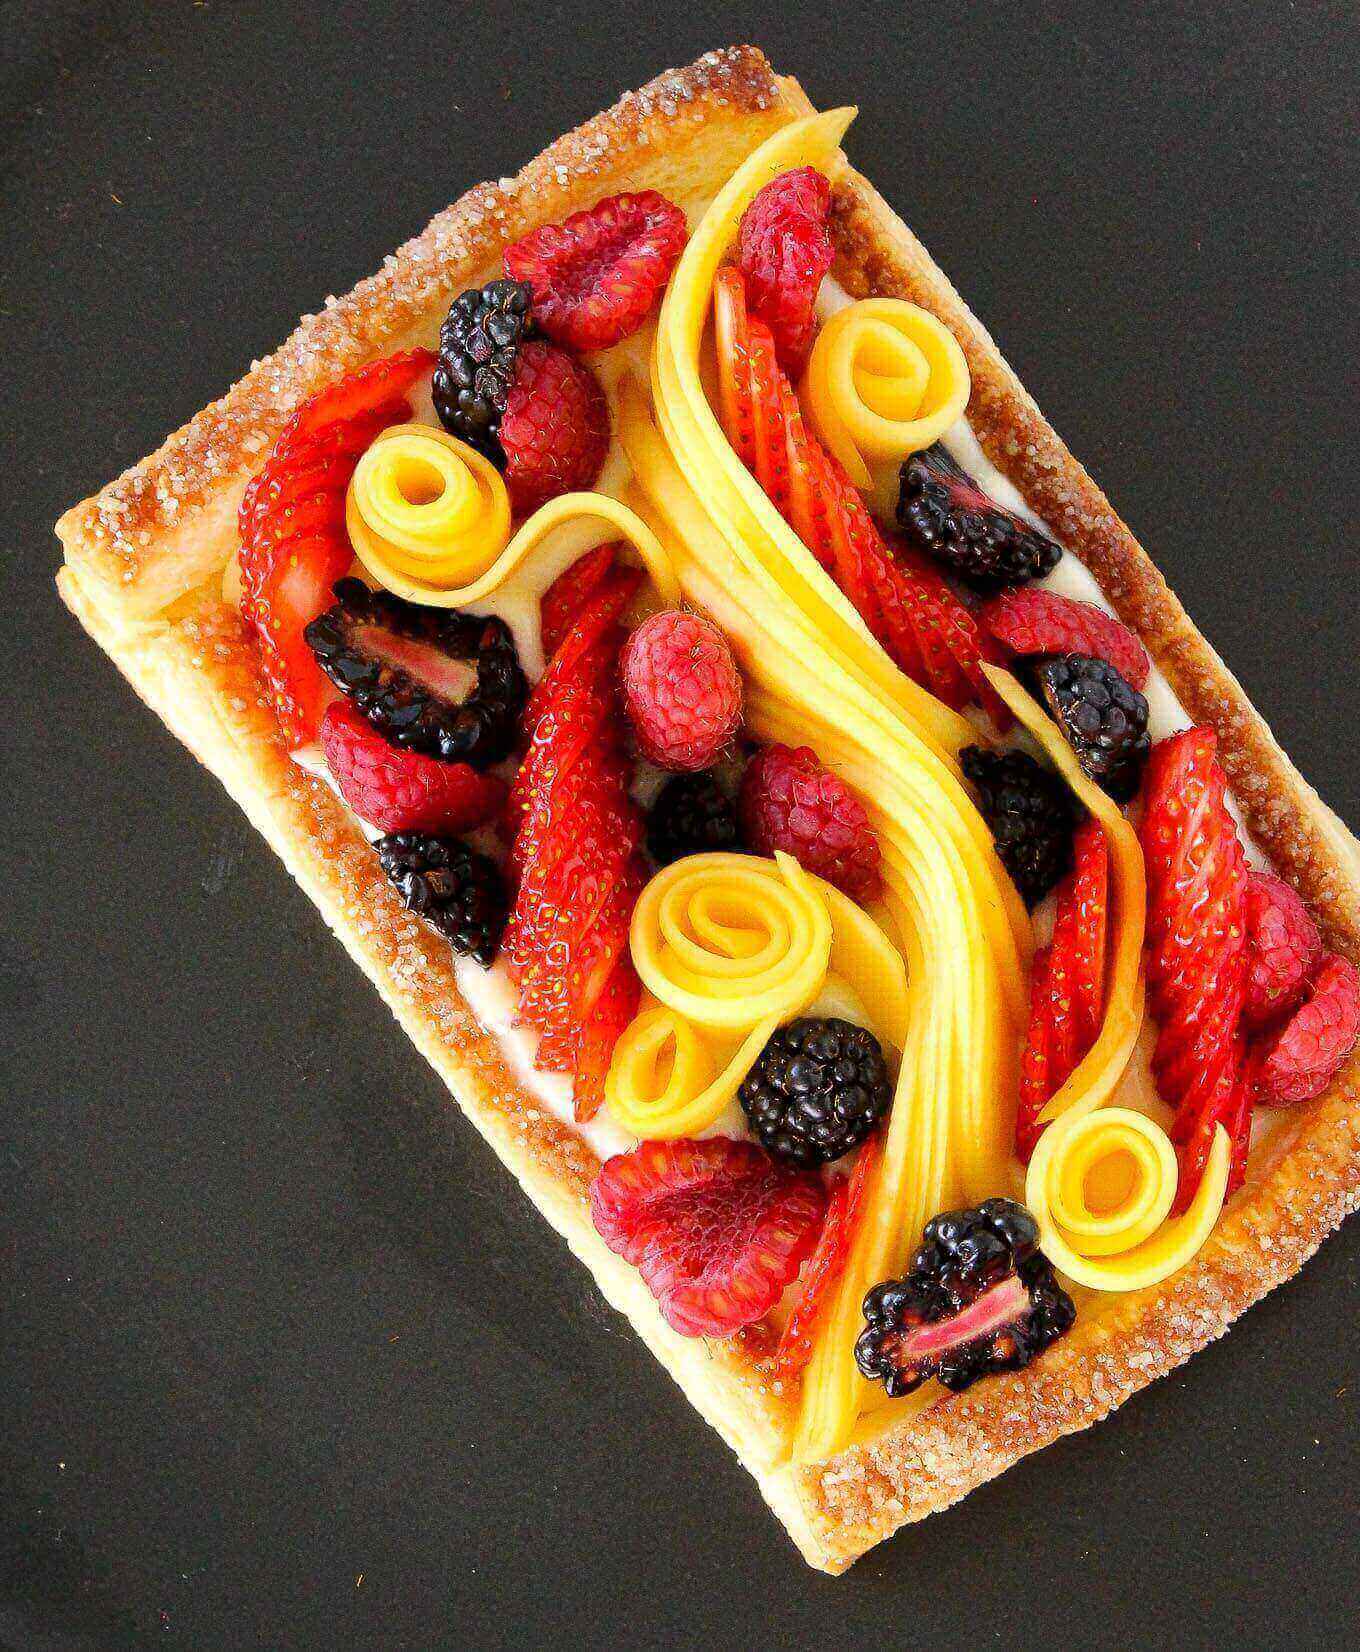 Puff pastry tart with decorative fruit including fresh berries and sliced mango along the center.